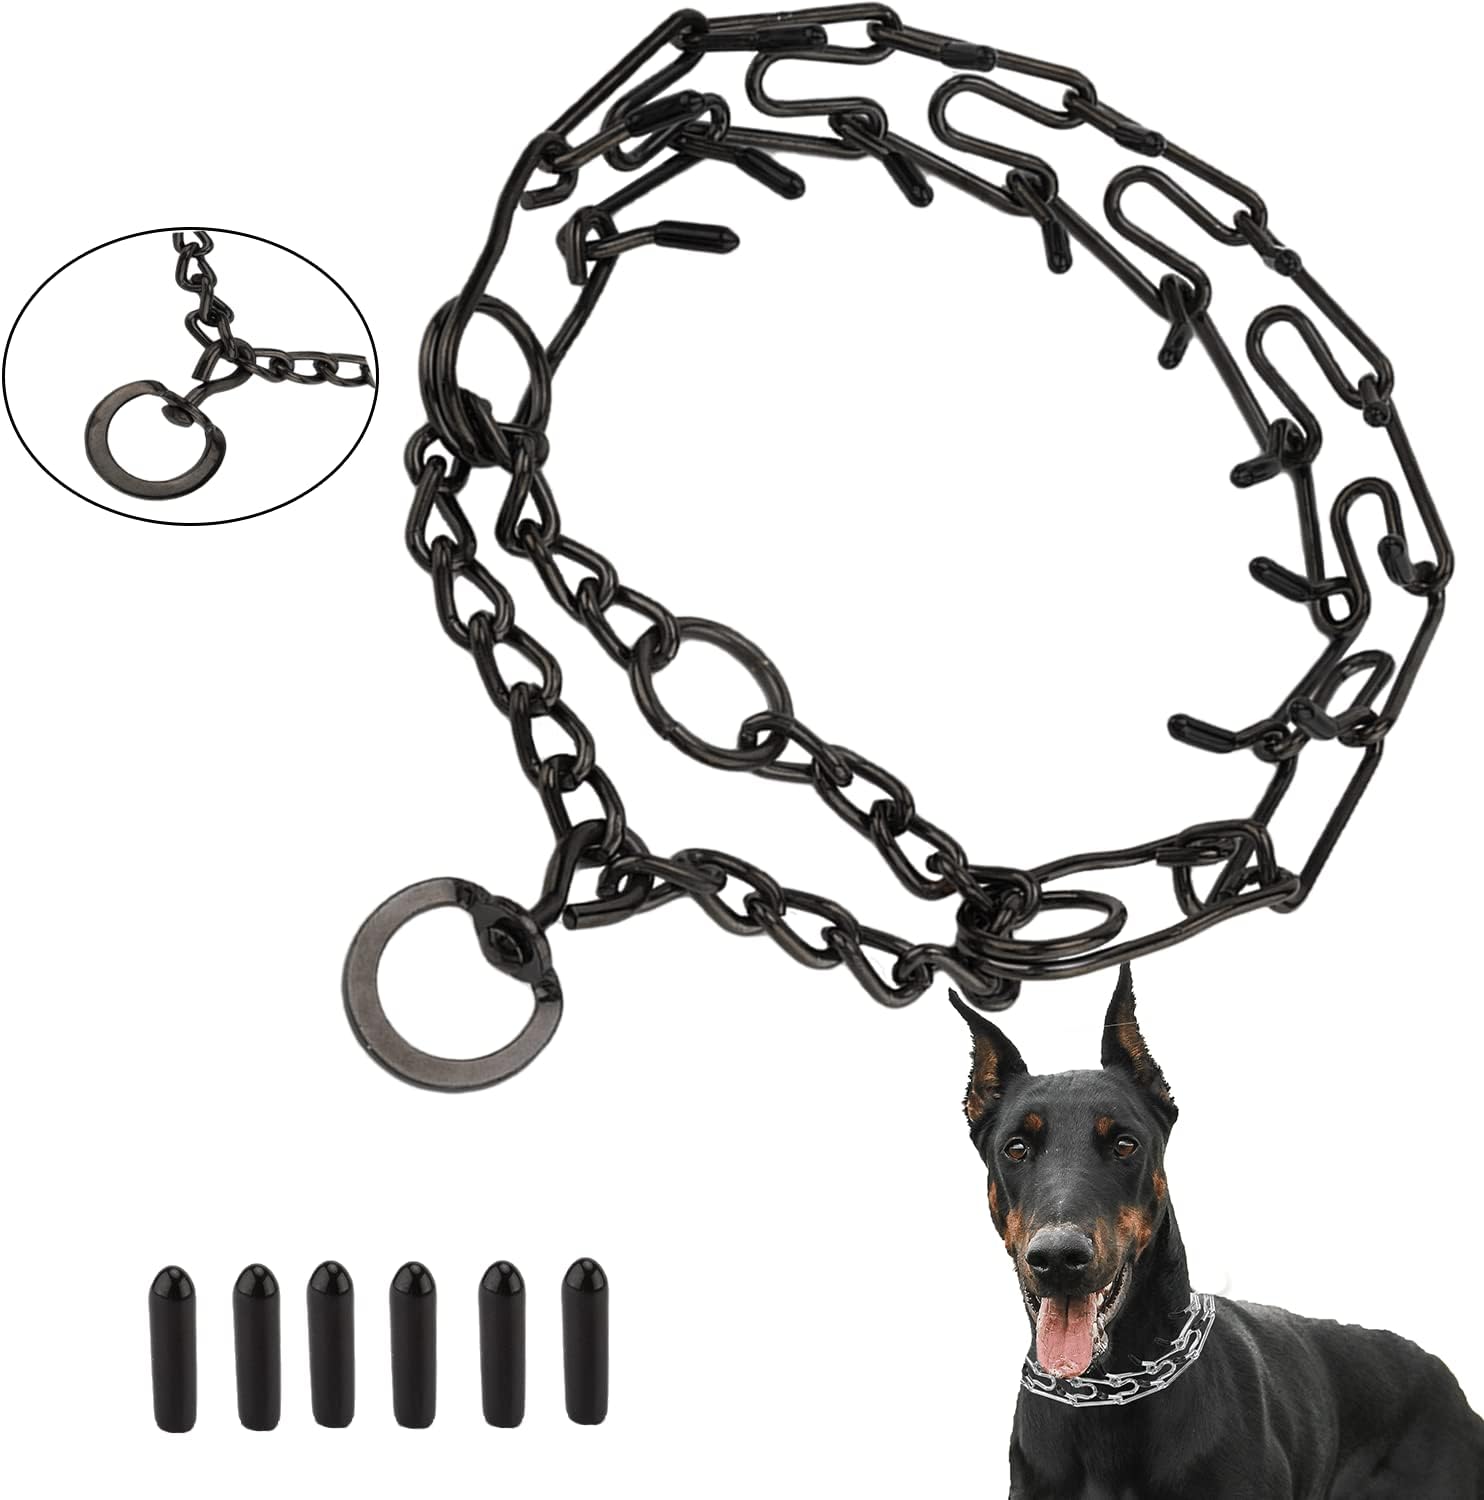 Dog Prong Collar Training Choke Chain Adjustable Pinch Collar Links with Comfort Rubber Tips and Quick Release Snap Buckle for Small Medium Large Dogs(Black-S)